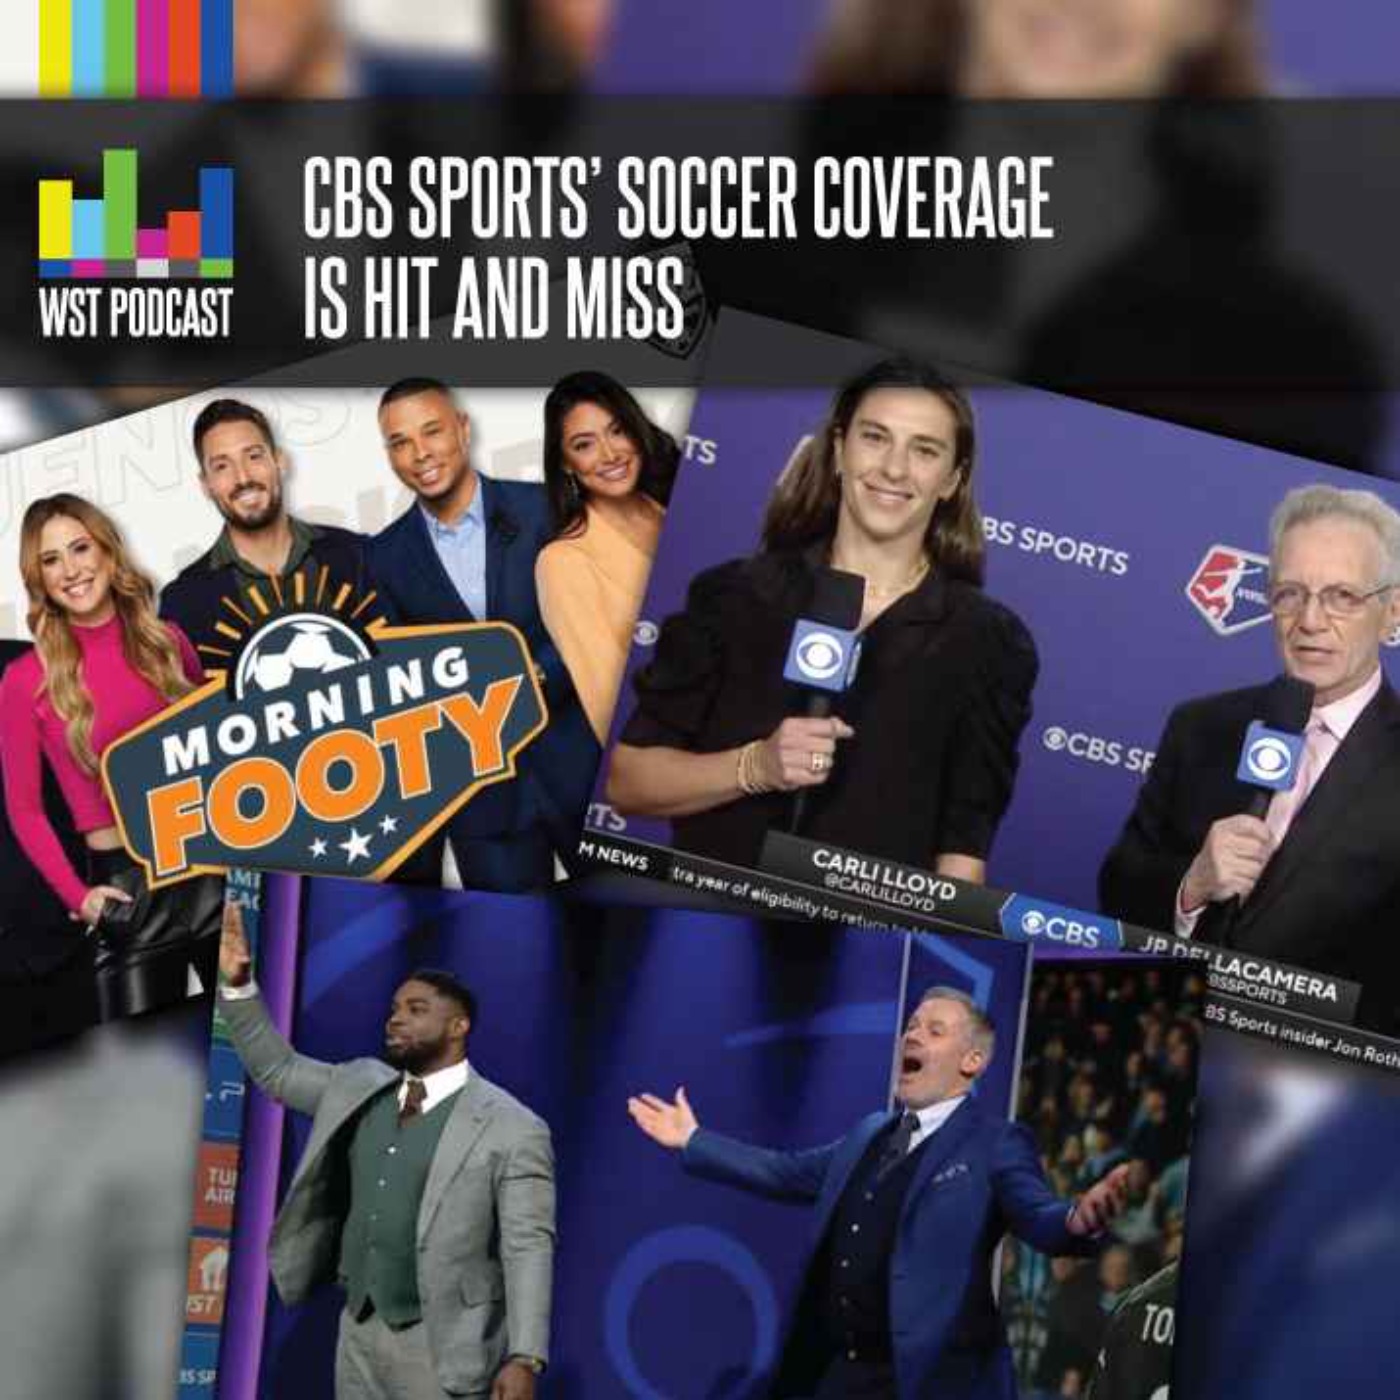 How CBS Sports' soccer coverage is hit and miss